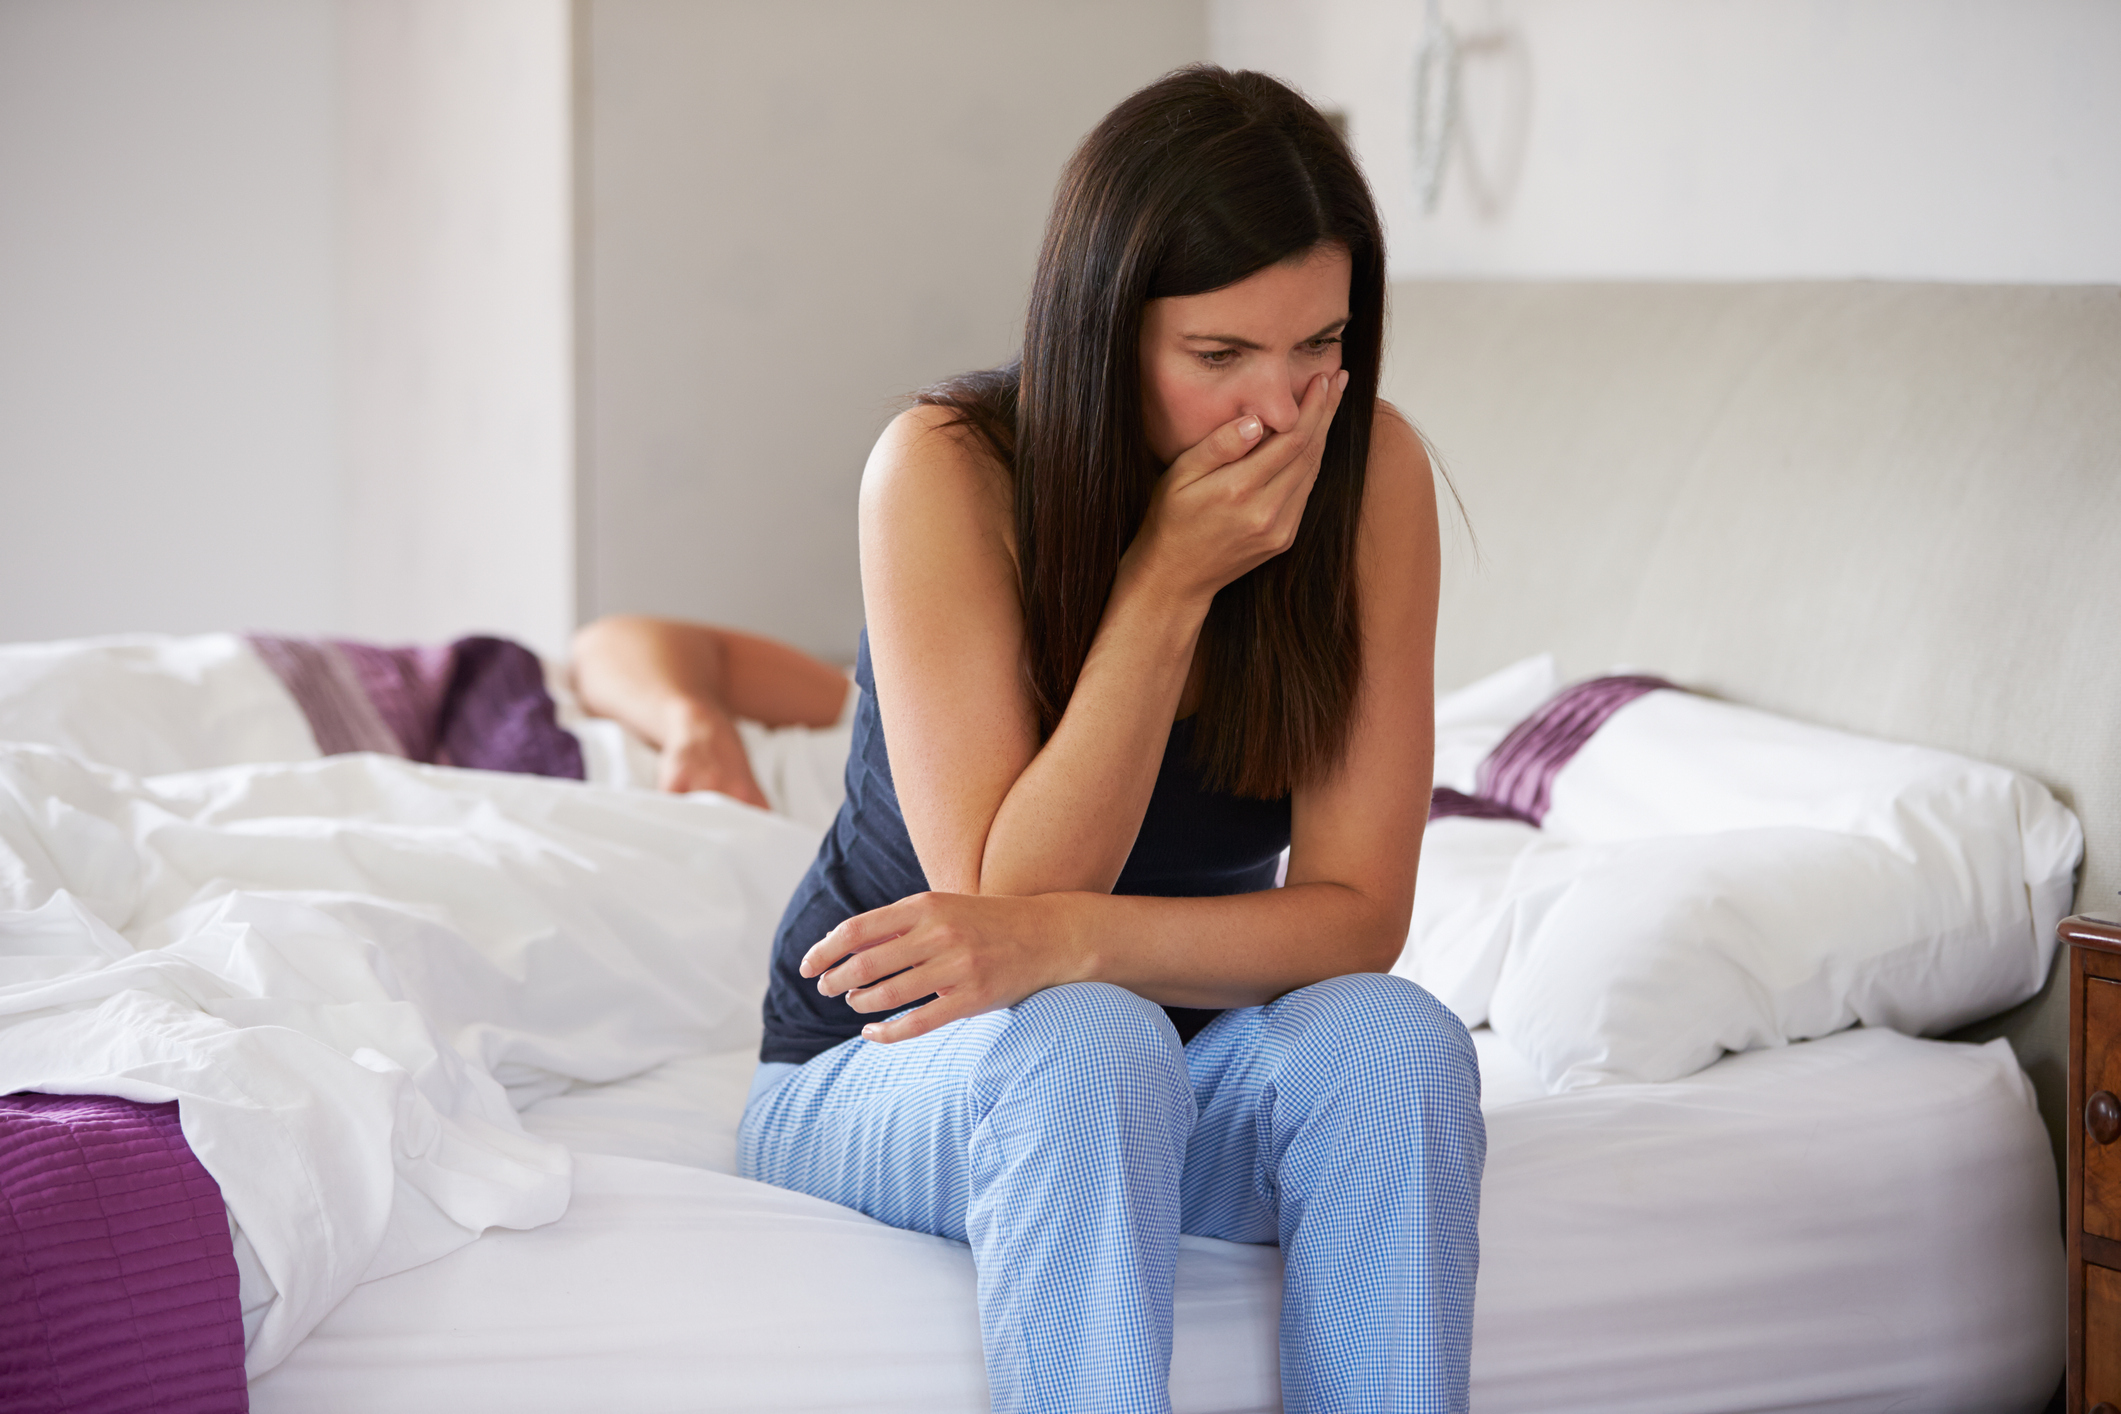 The supplement that could solve morning sickness